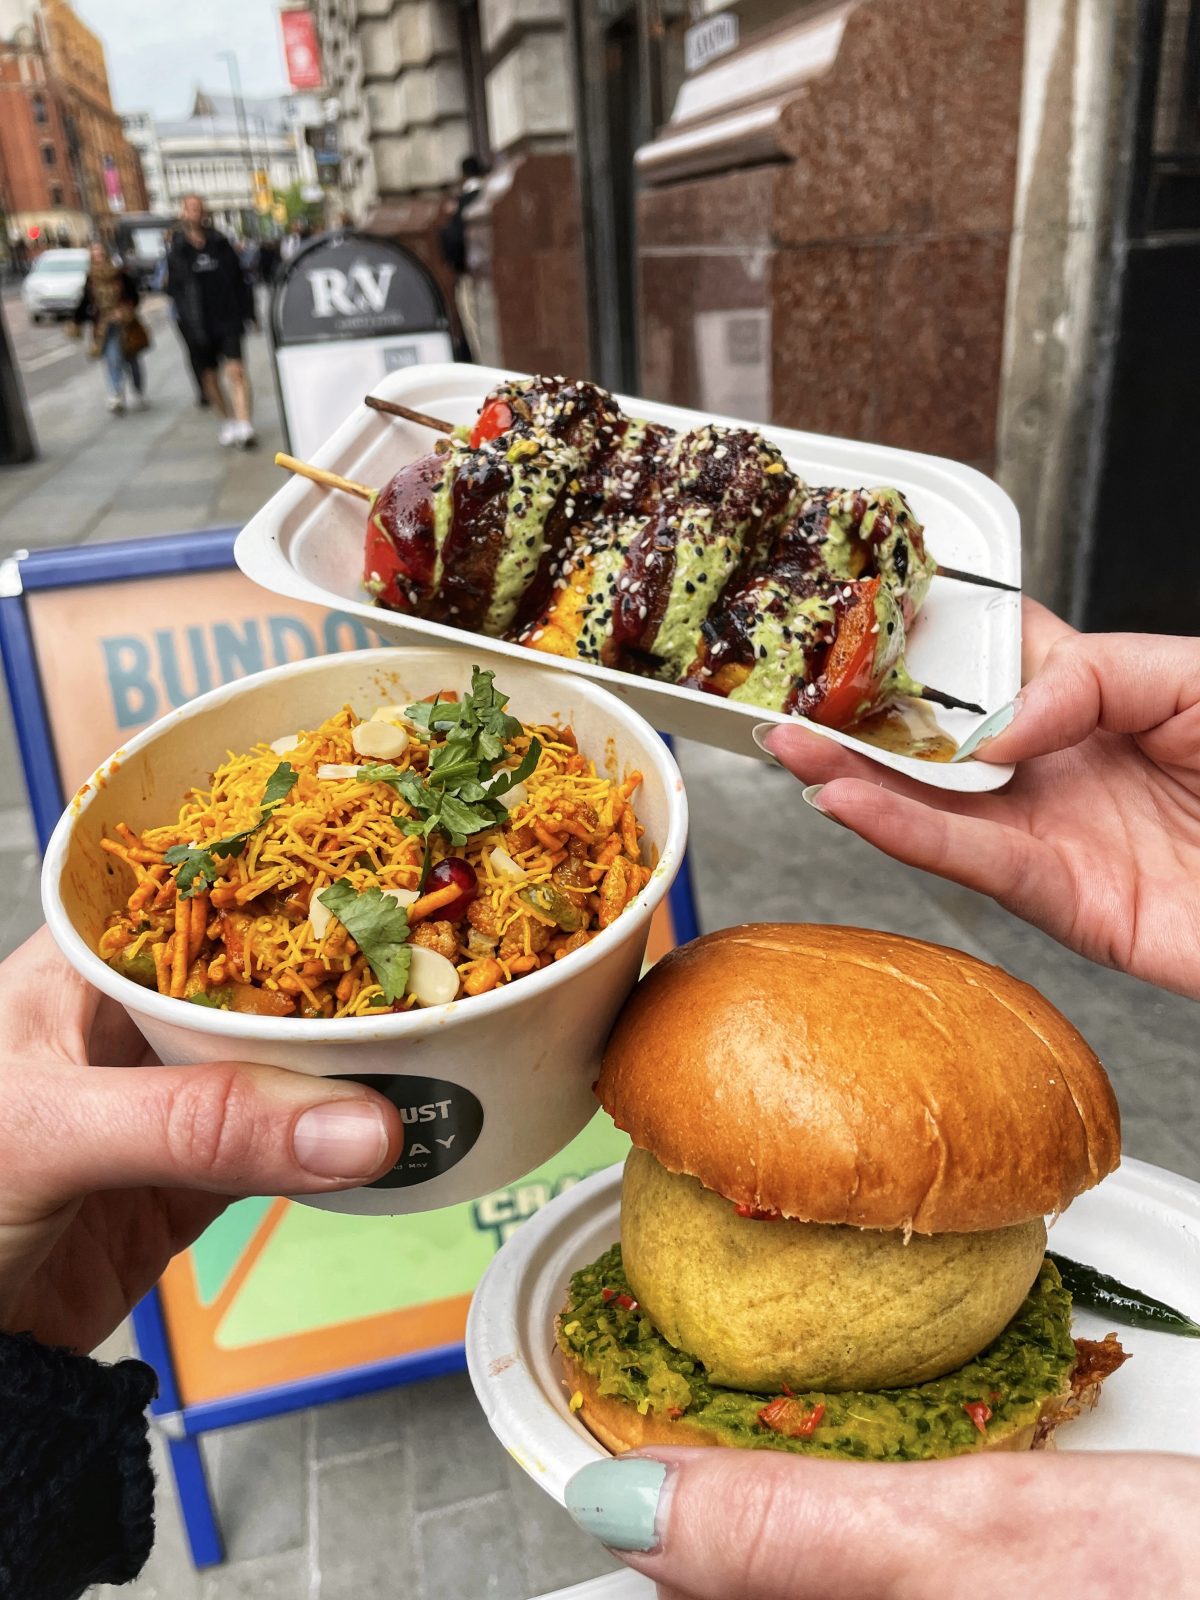 Bundobust launches limited edition specials menu with Liverpool favourite Maray, The Manc